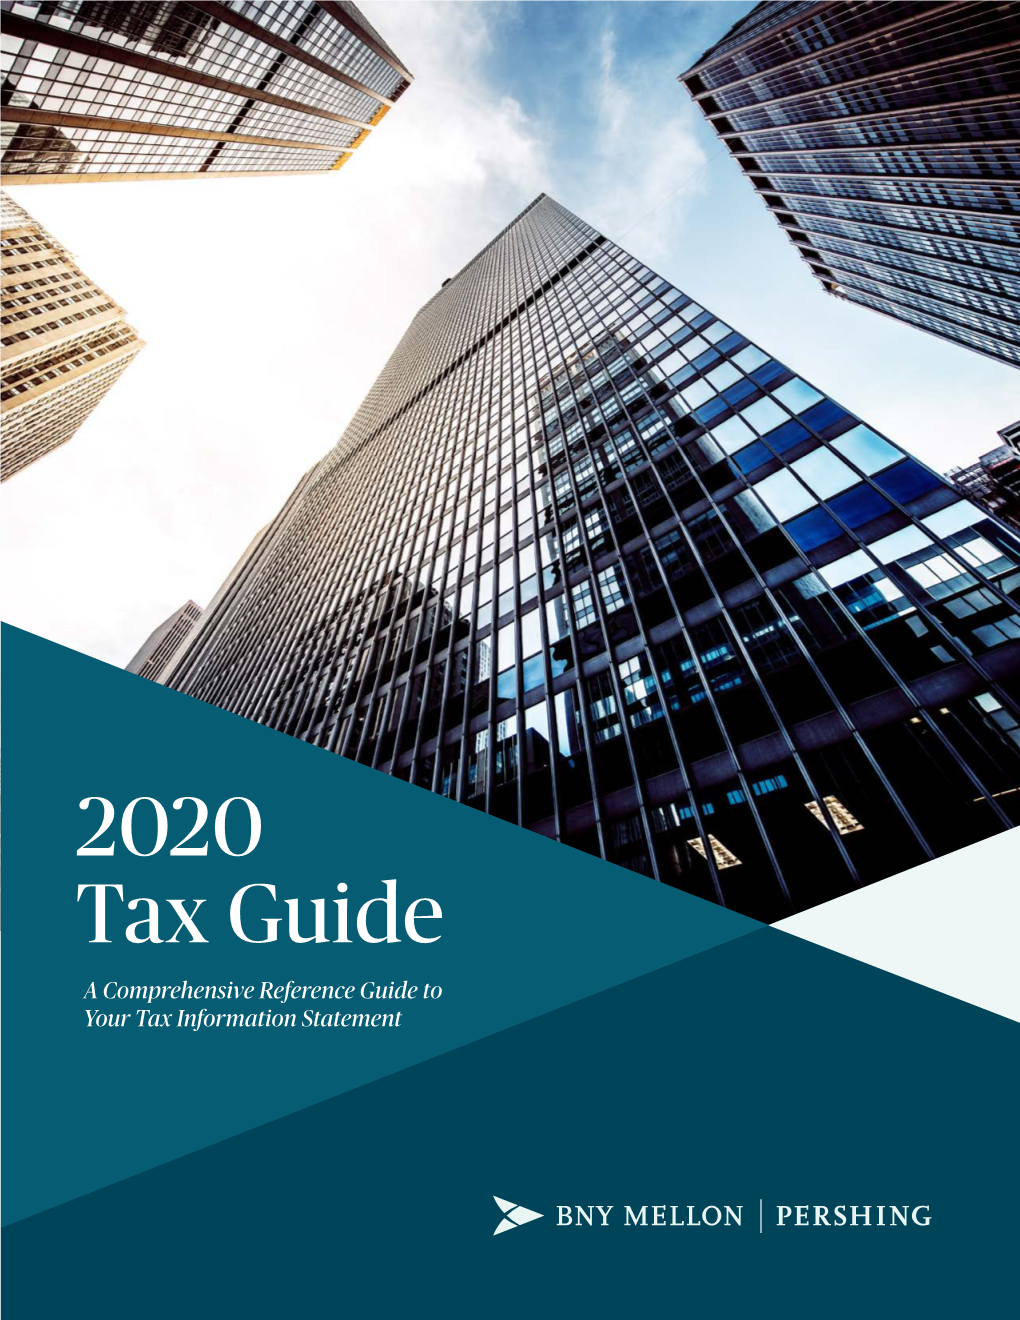 2020 Tax Guide a Comprehensive Reference Guide to Your Tax Information Statement Contents